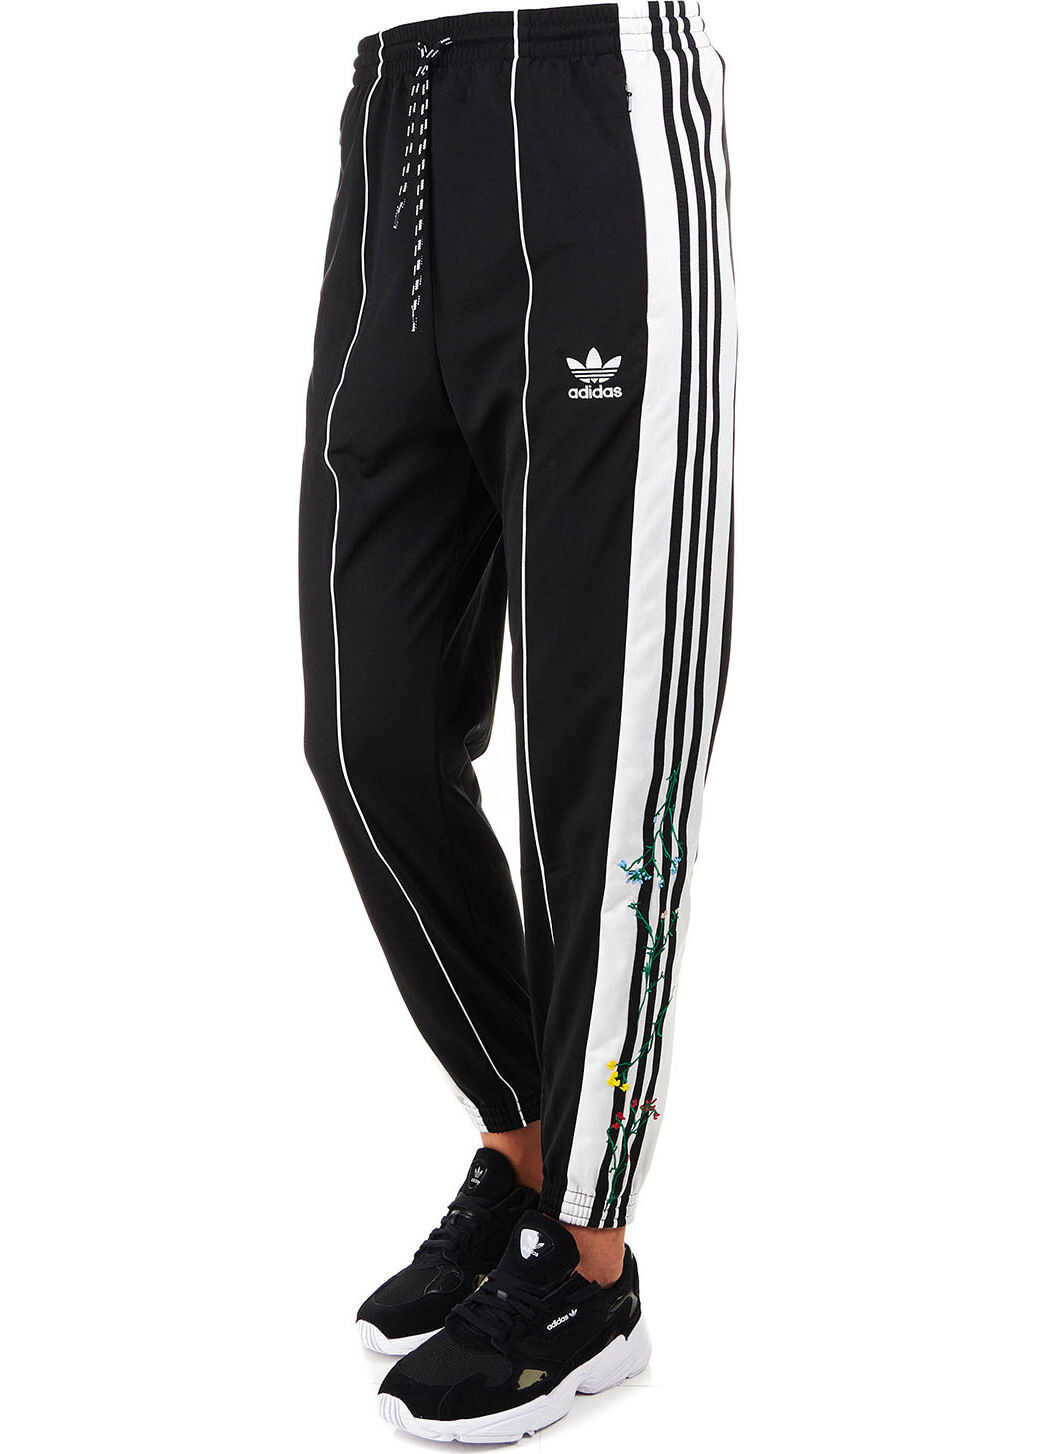 adidas Originals Trackpants with floral embroideries Black